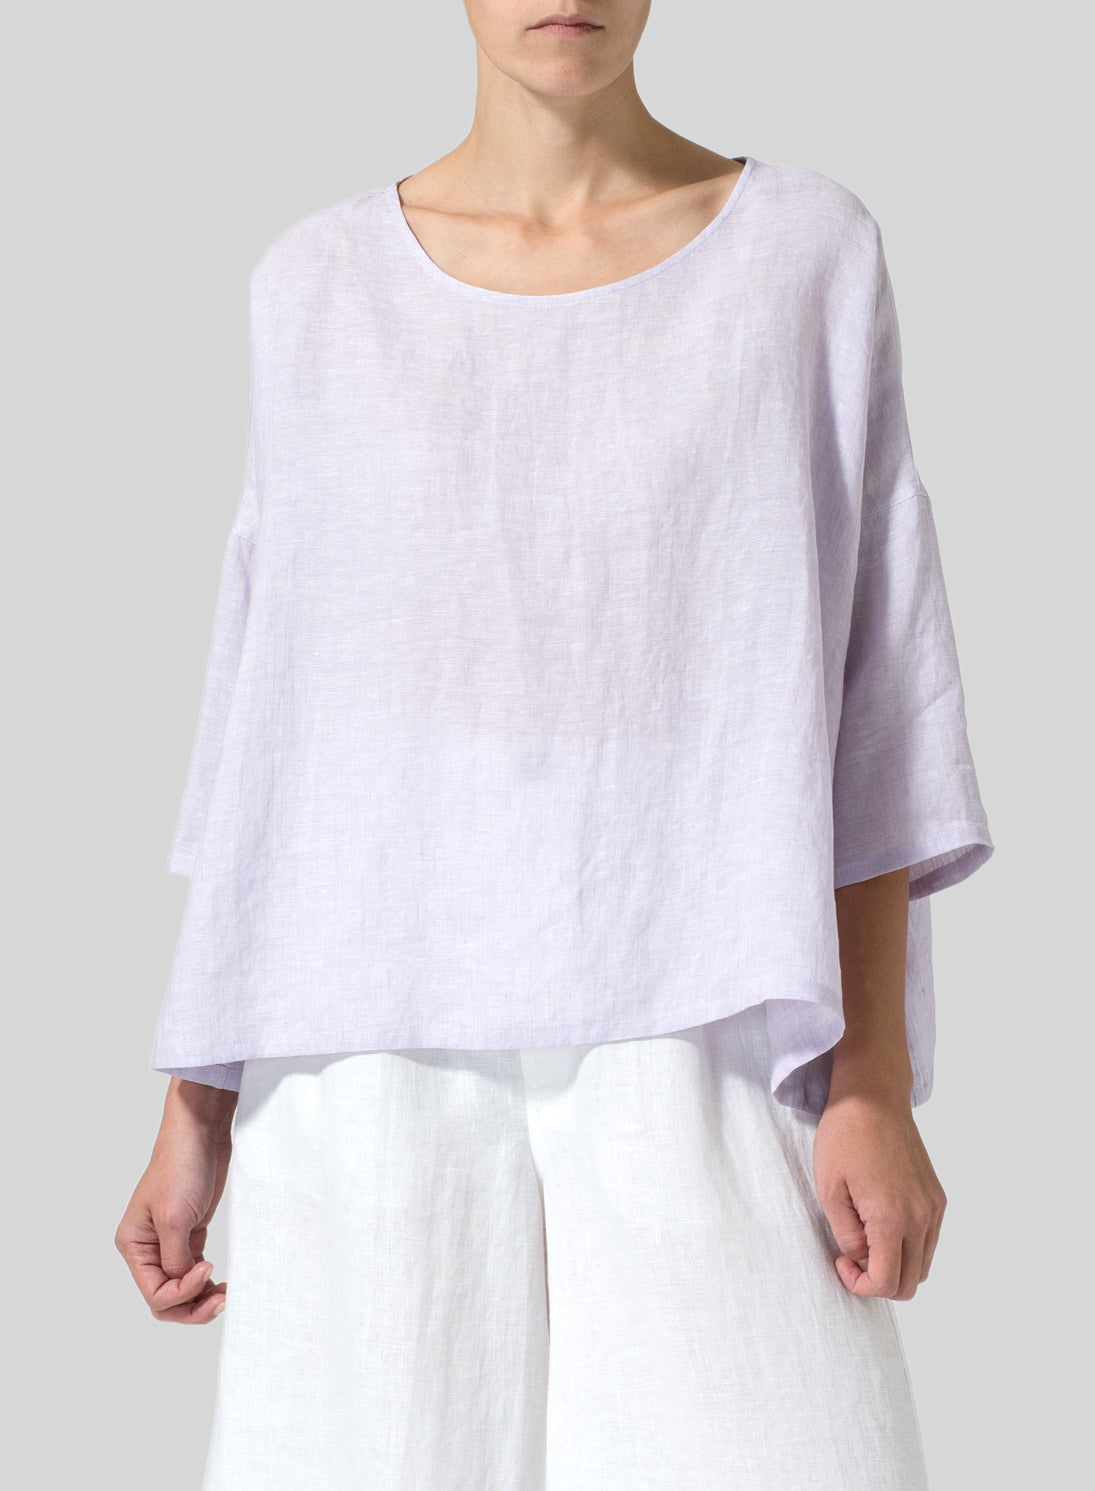 Cotton and Linen Drawstring Cuff Short Sleeve Top